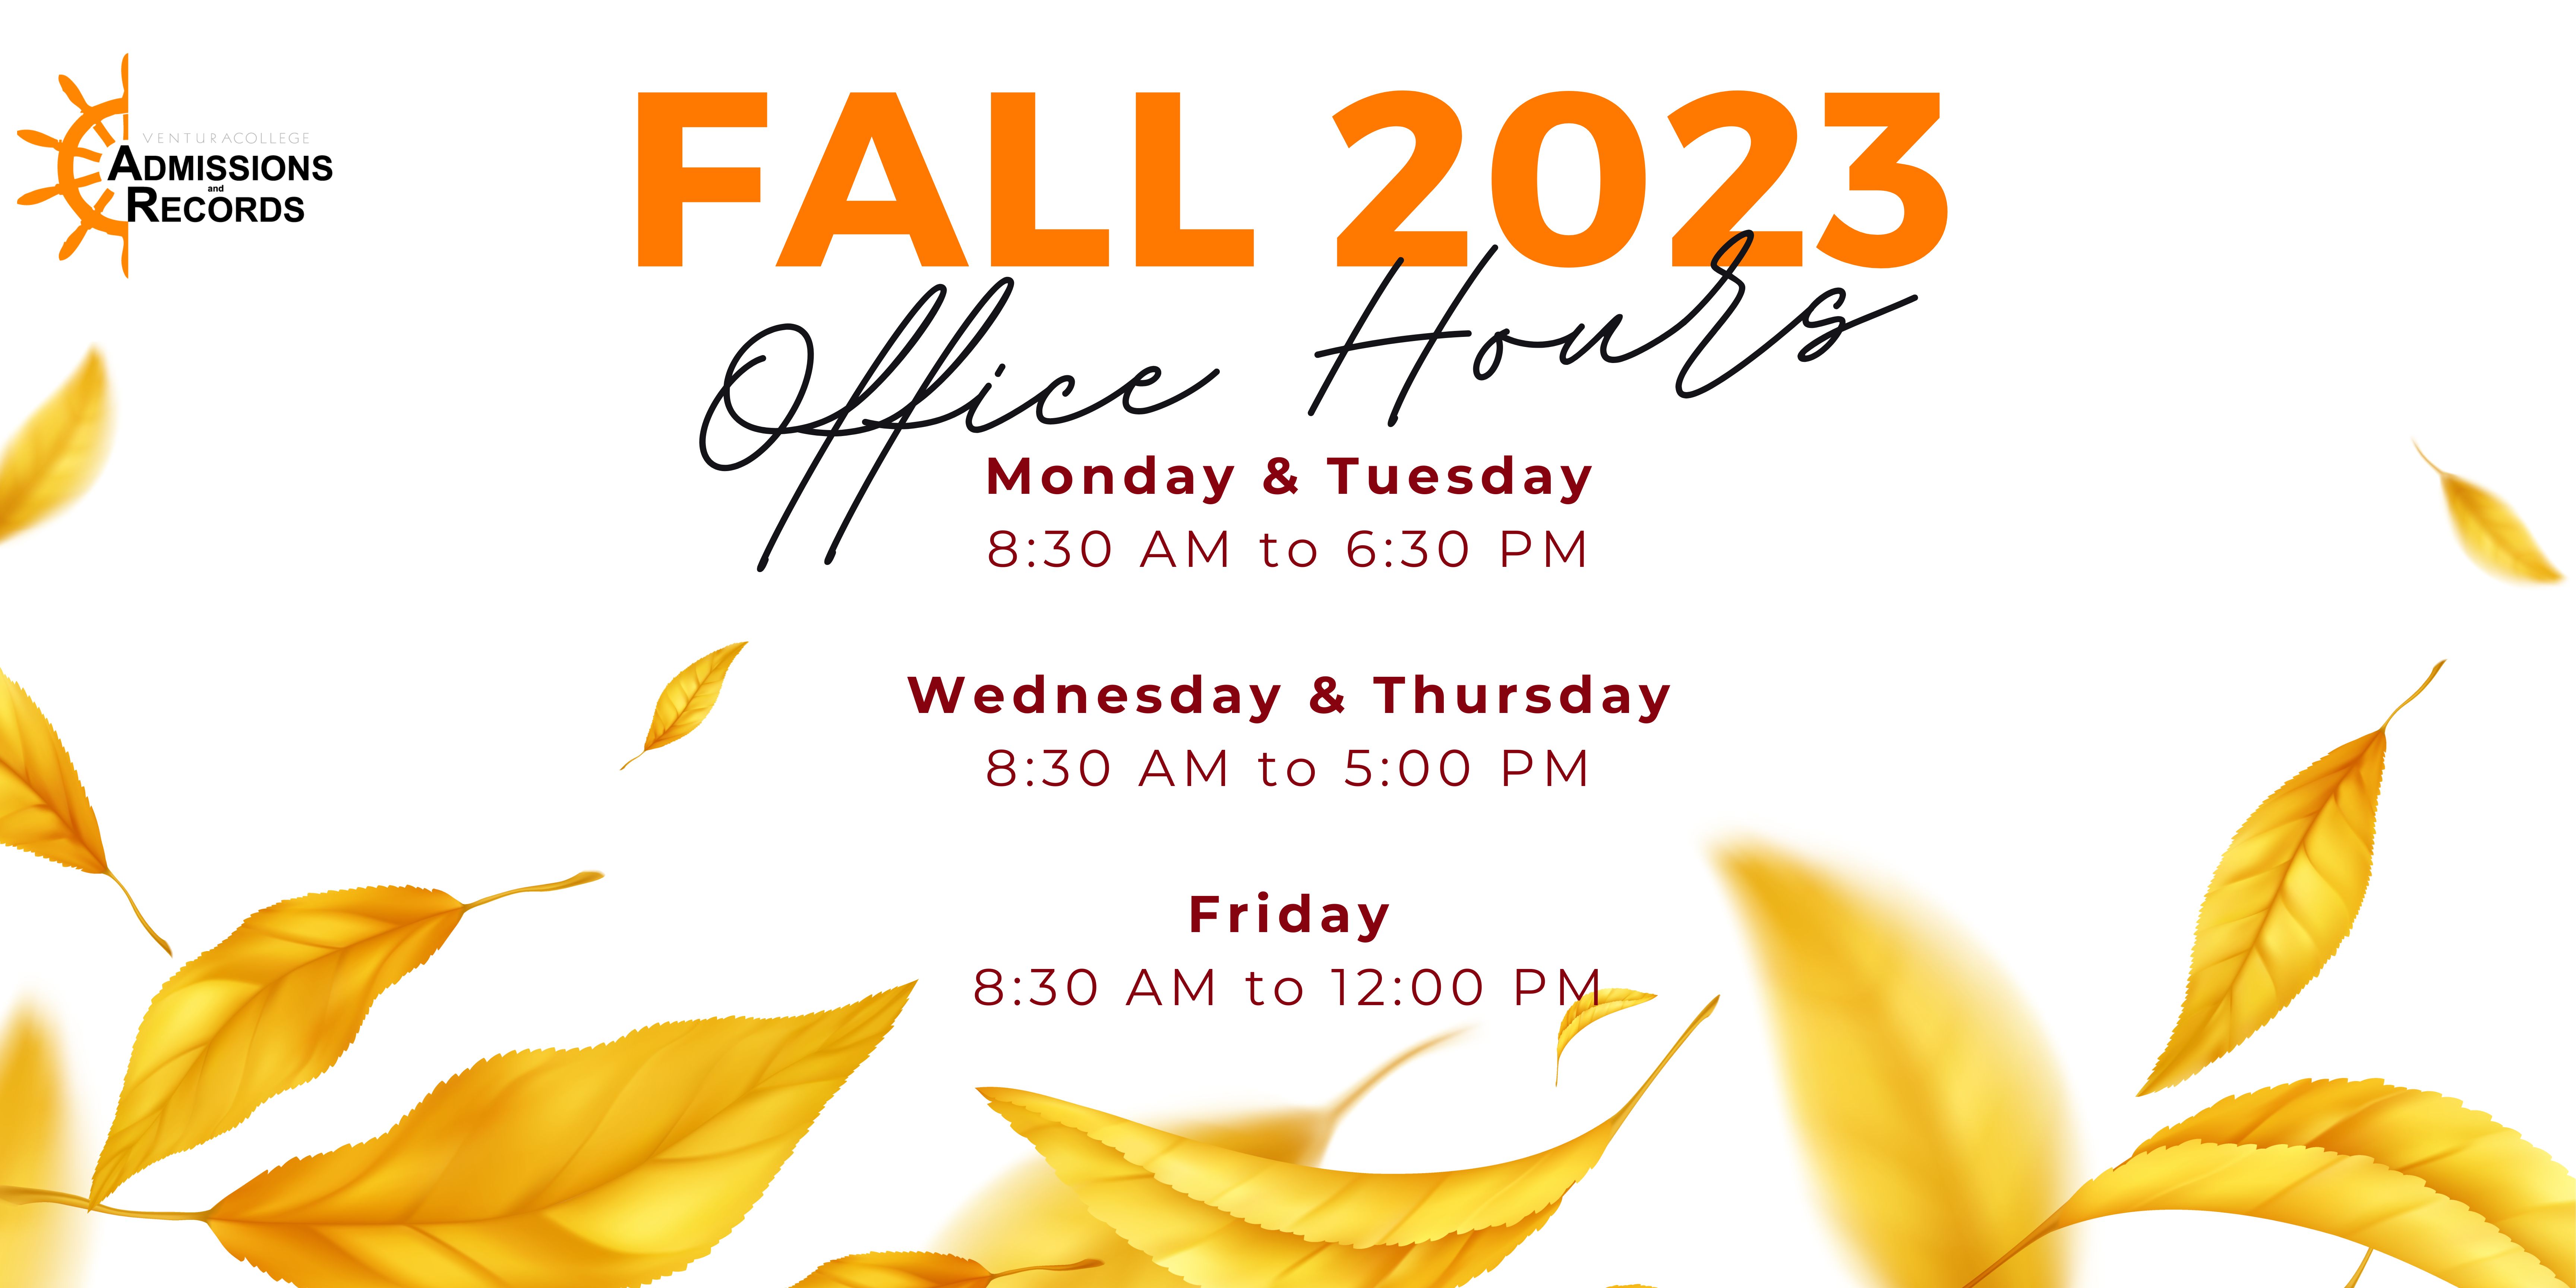 Fall 2023 Office Hours